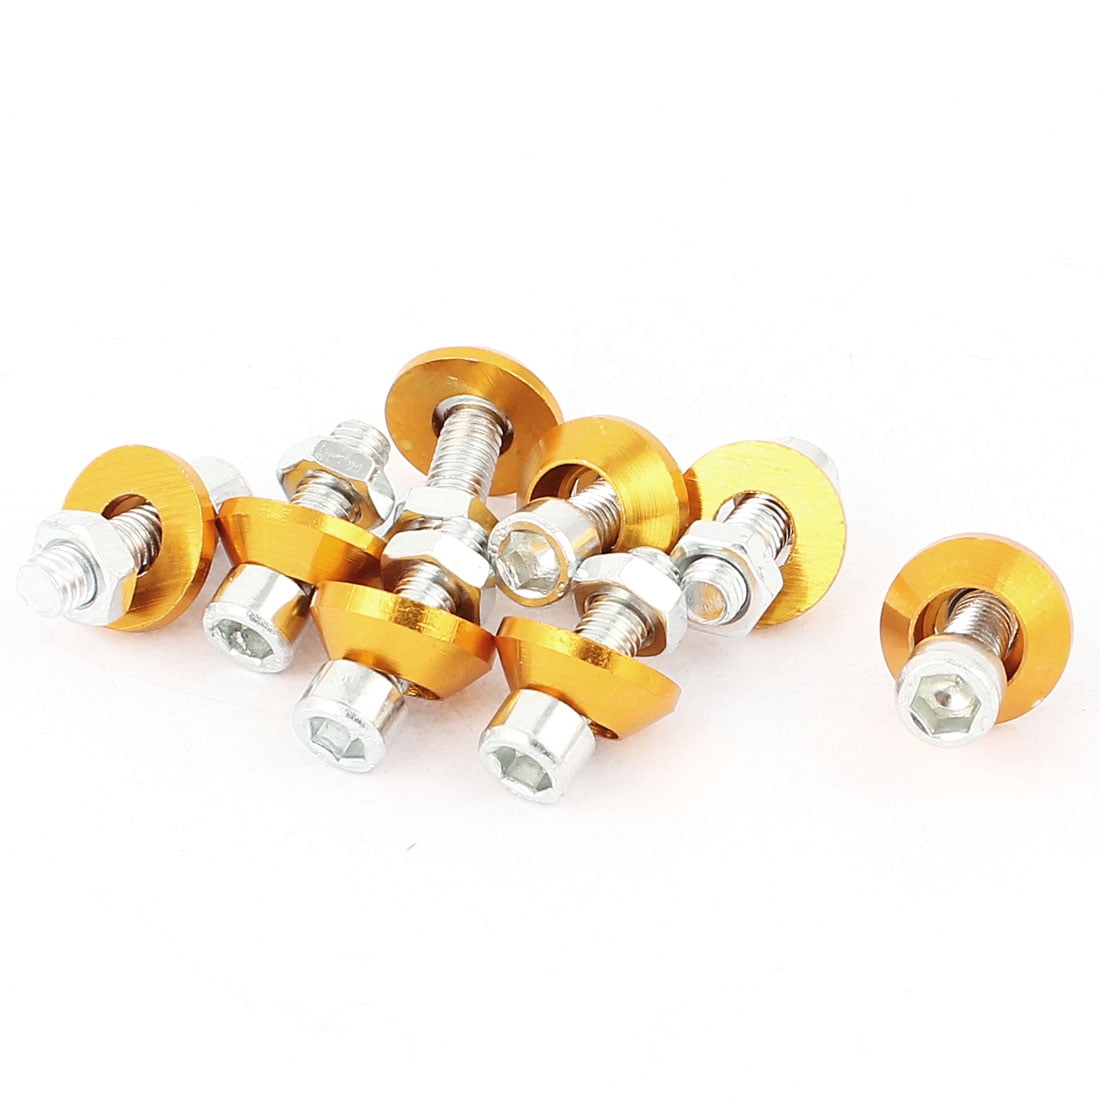 F FIERCE CYCLE 4pcs 6mm Metal Motorcycle License Plate Frame Bolt Screw Fastener Gold Tone